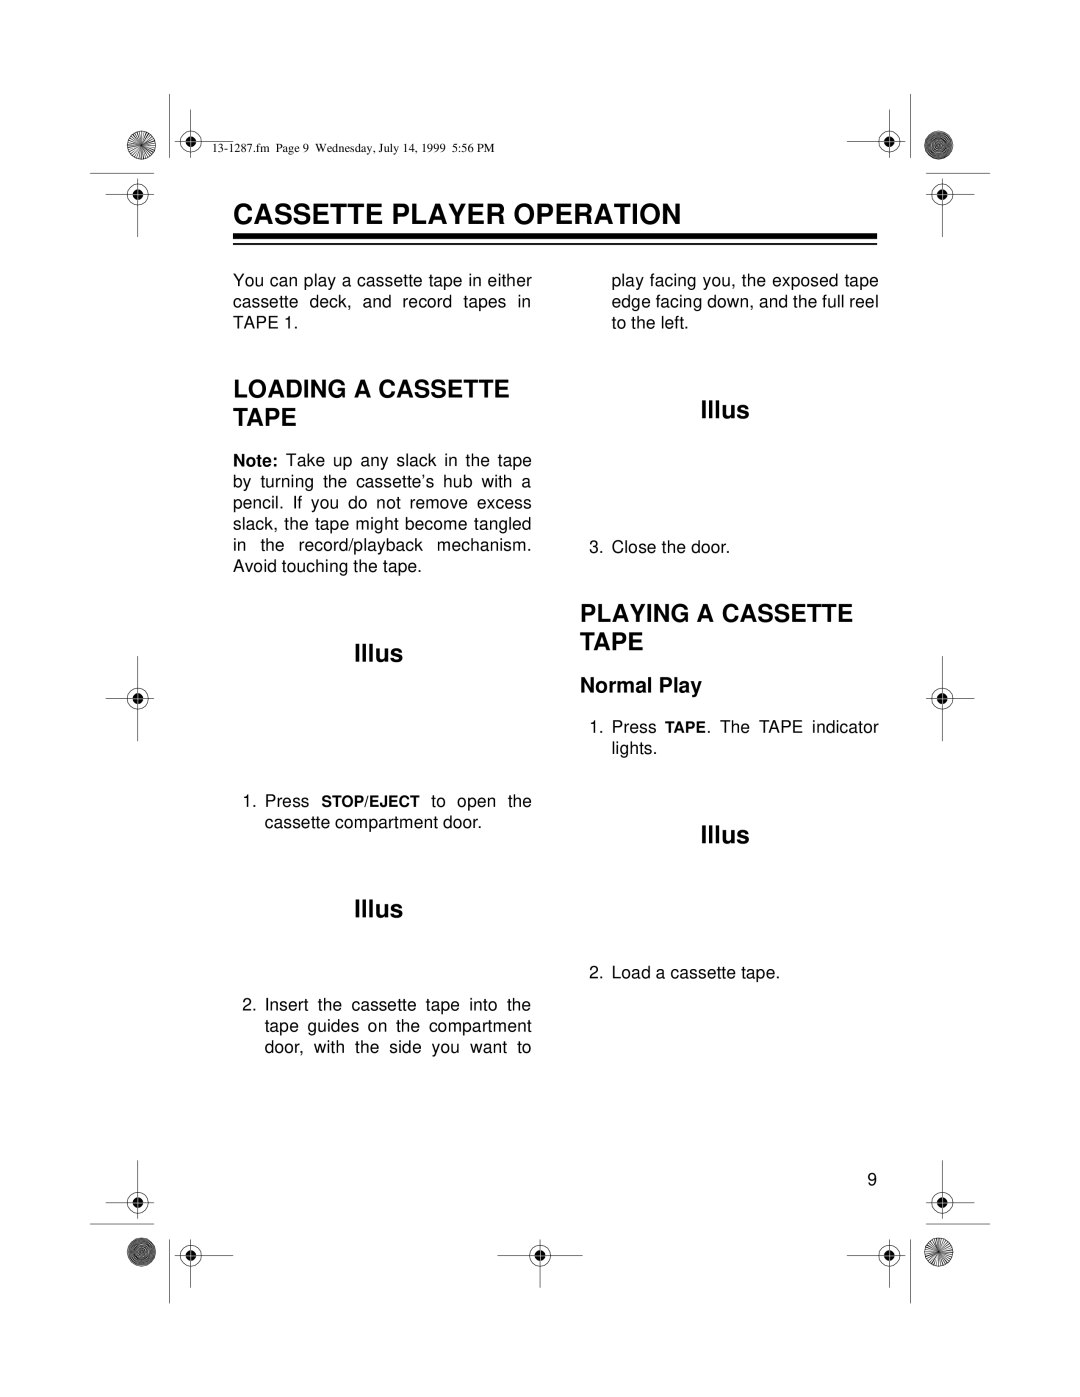 Optimus 740 owner manual Cassette Player Operation, Loading A Cassette Tape, Playing A Cassette Tape, Normal Play, Illus 